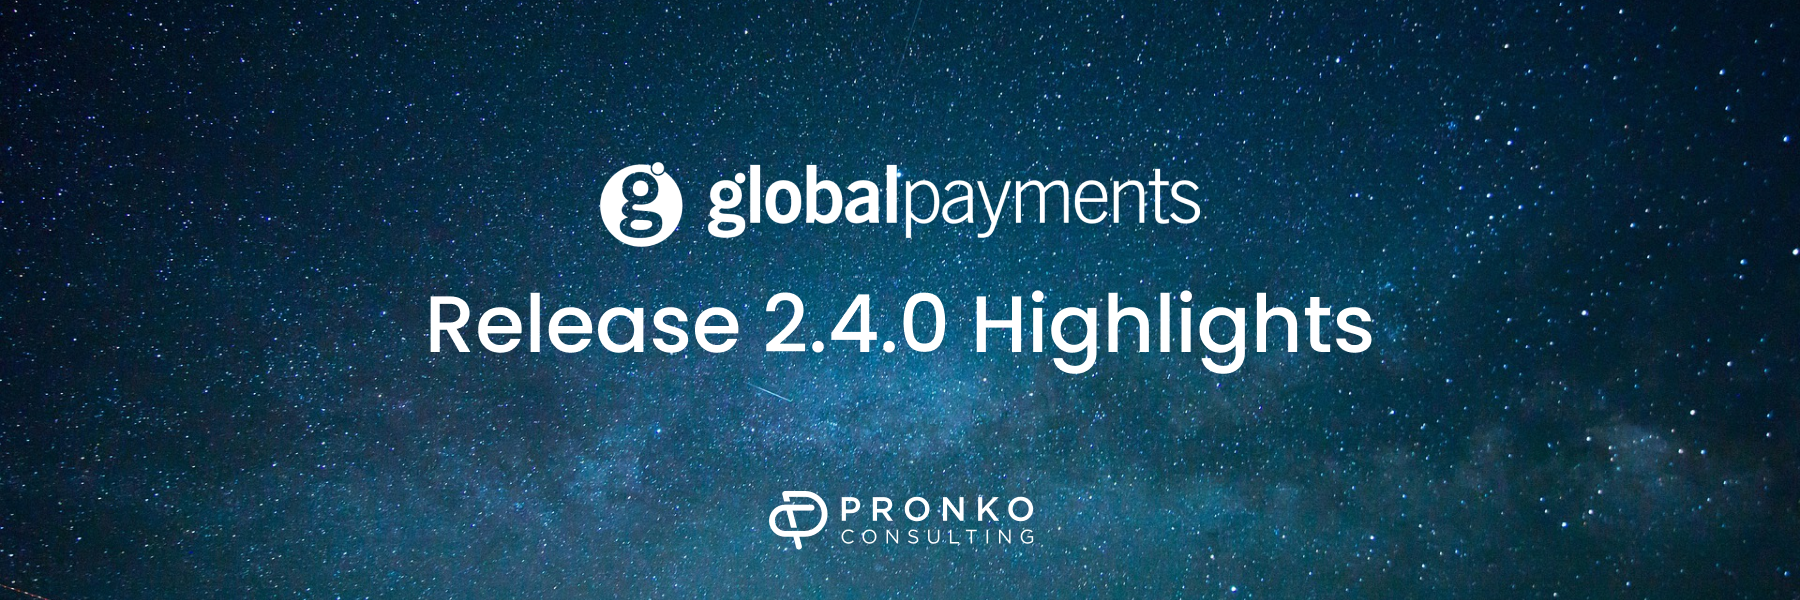 Global Payments Version 2.4.0 Release Highlights